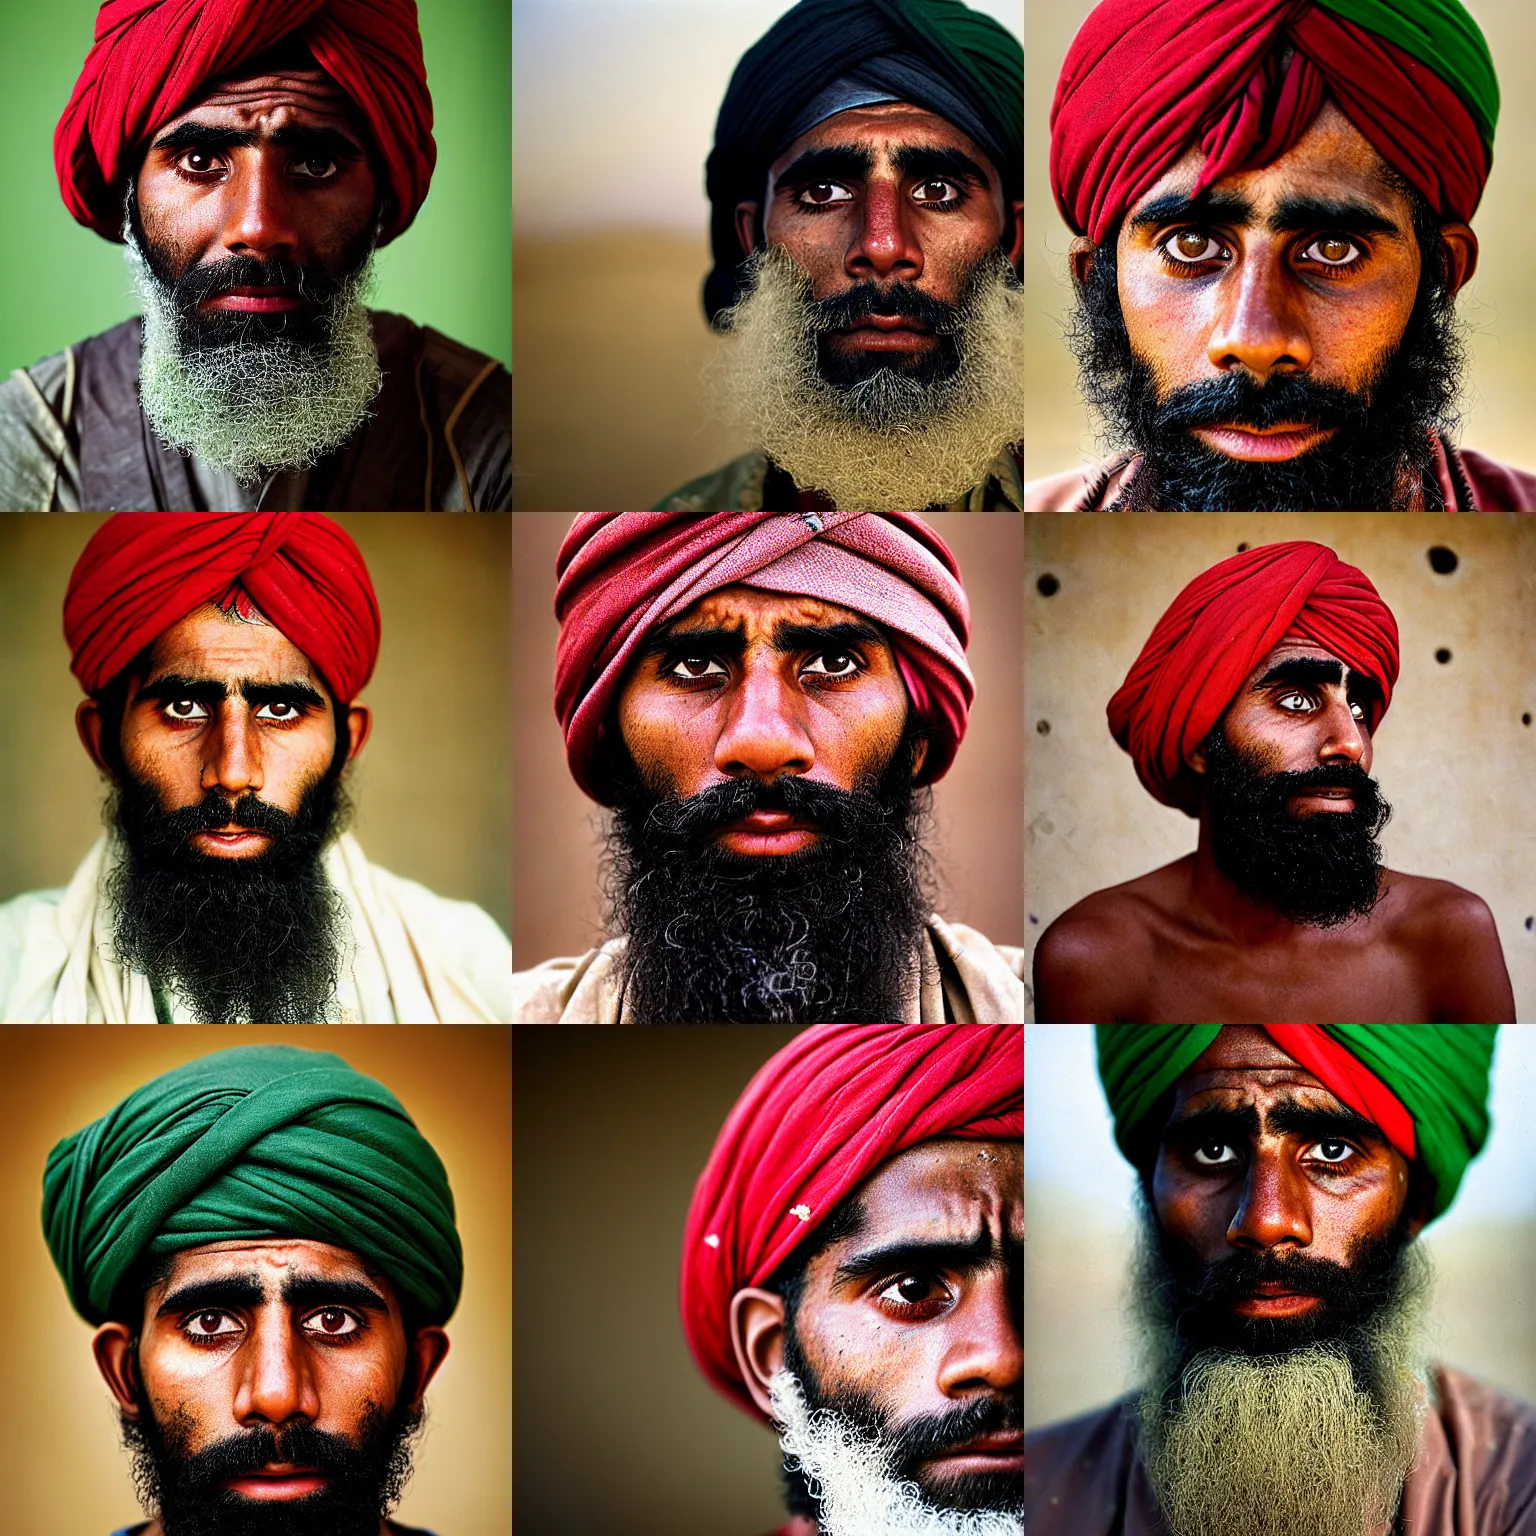 Prompt: portrait of kyrie irving as afghan man, green eyes and red turban looking intently, photograph by steve mccurry